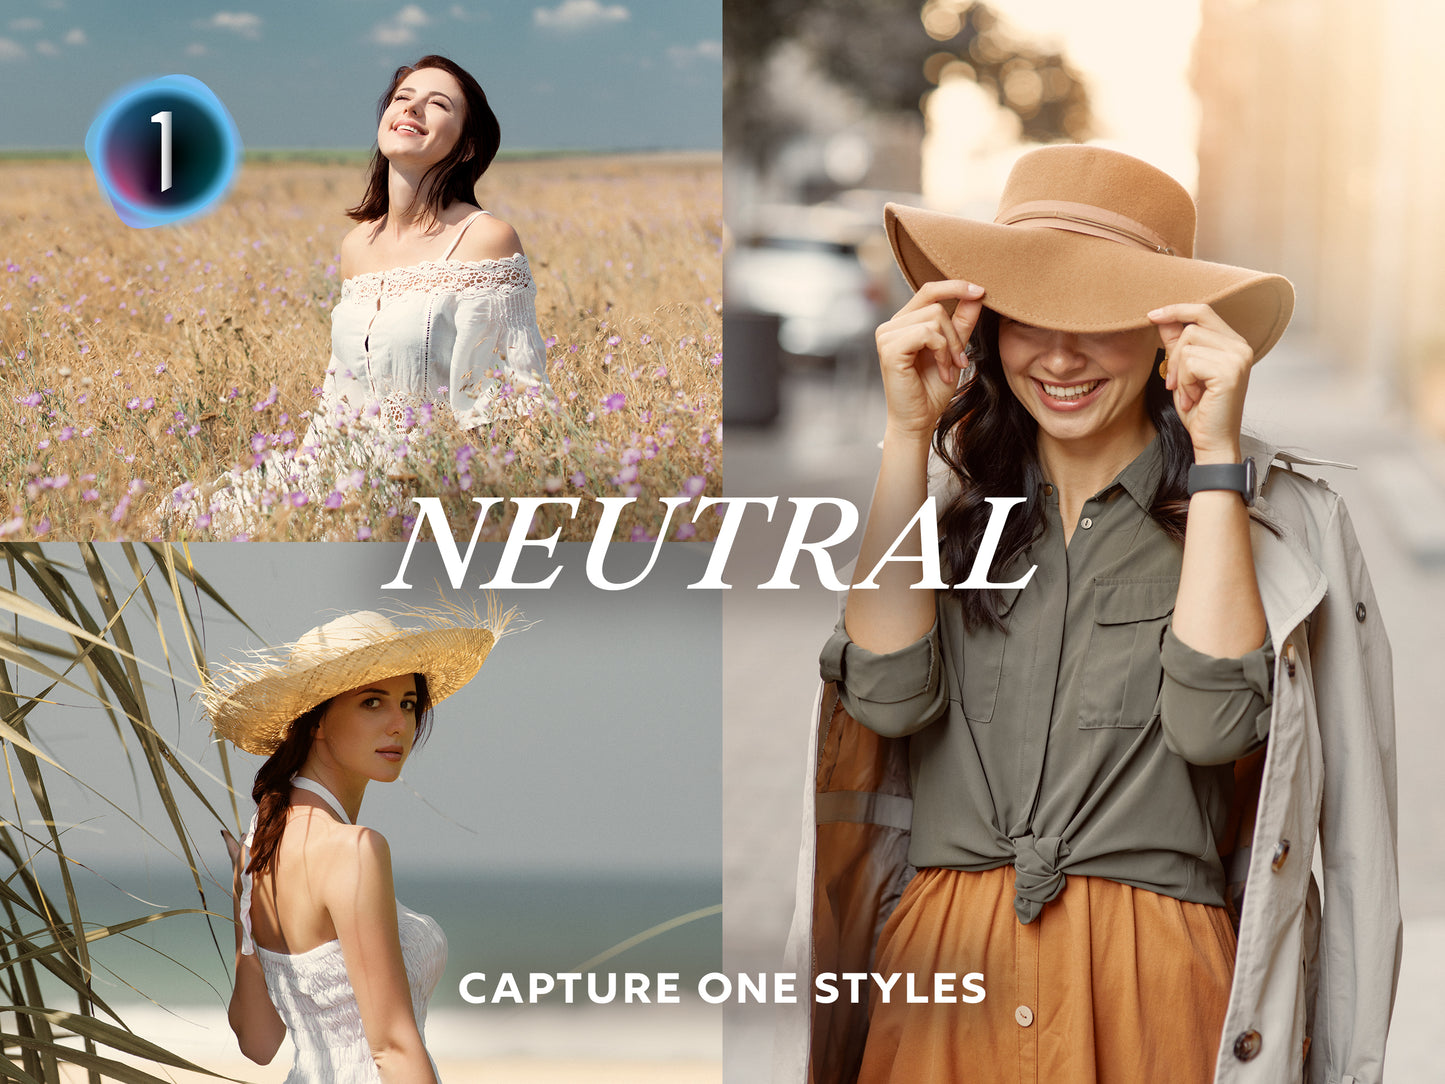 Neutral Capture One Styles